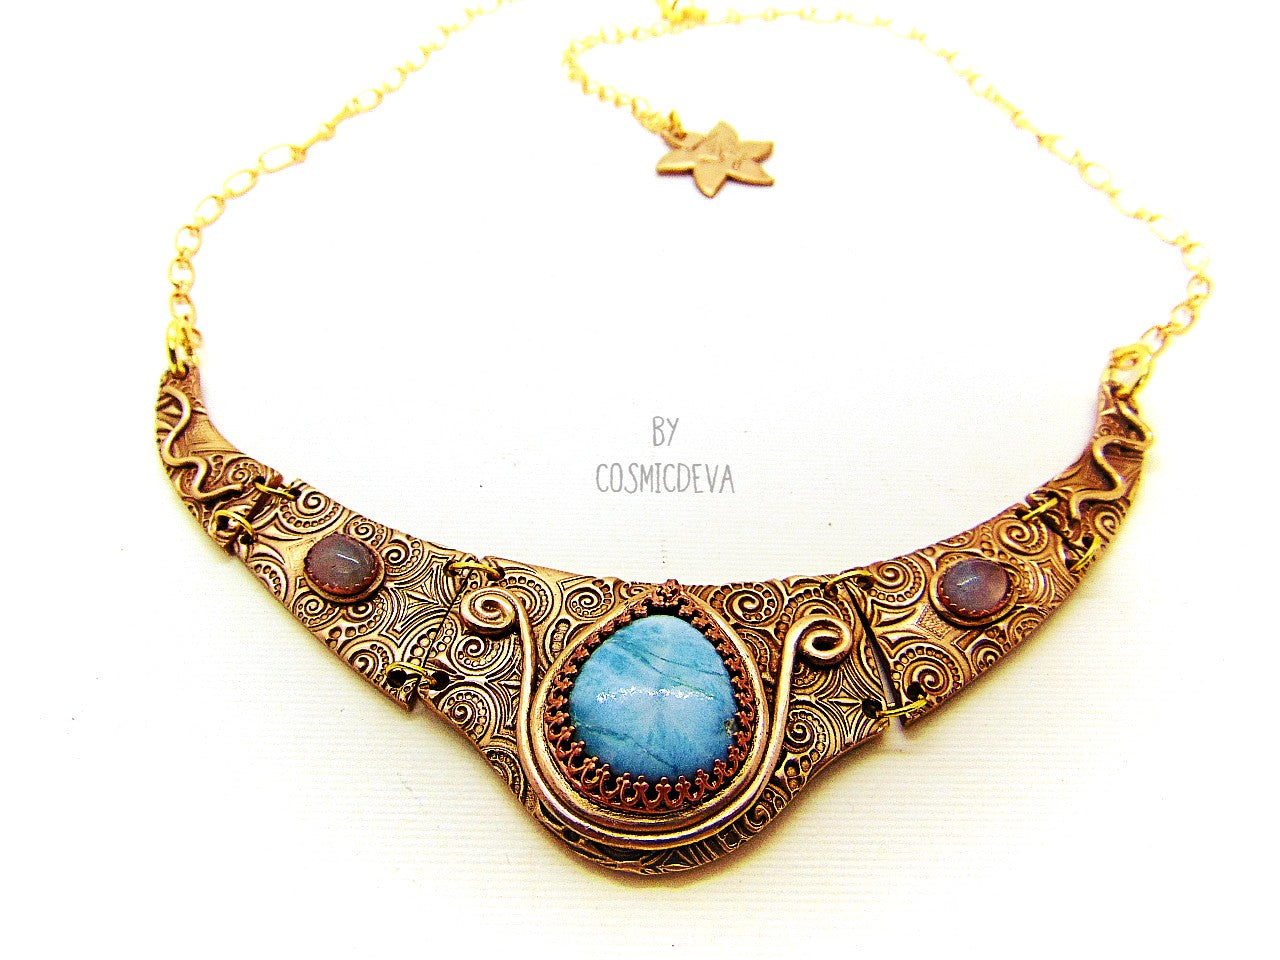 Distinguish yourself with this stunning Ancient Style Choker Collar With Larimar Gold Bronze Necklace. Hand-formed with solid gold bronze, it exudes elegance with the aquamarine and larimar gemstones embedded in its center. Feel luxurious and be the envy of all! A unique adornment that will adore to wear in all occasions.